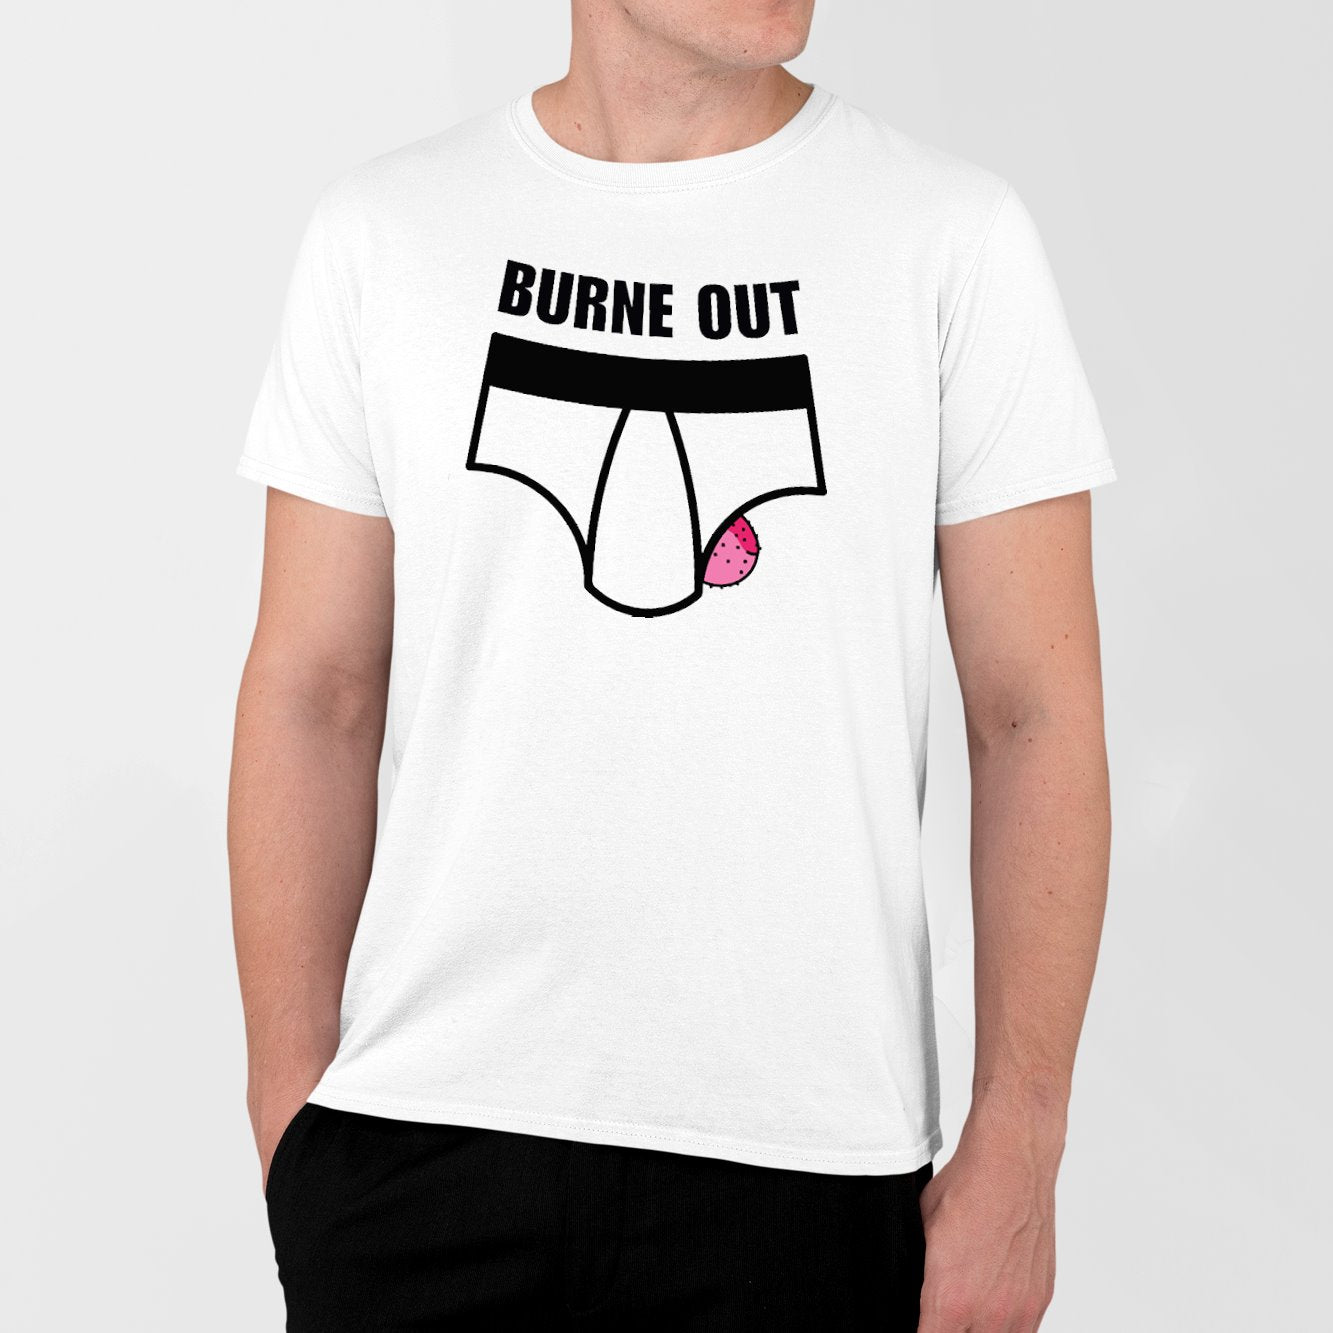 T-Shirt Homme Burne out Blanc